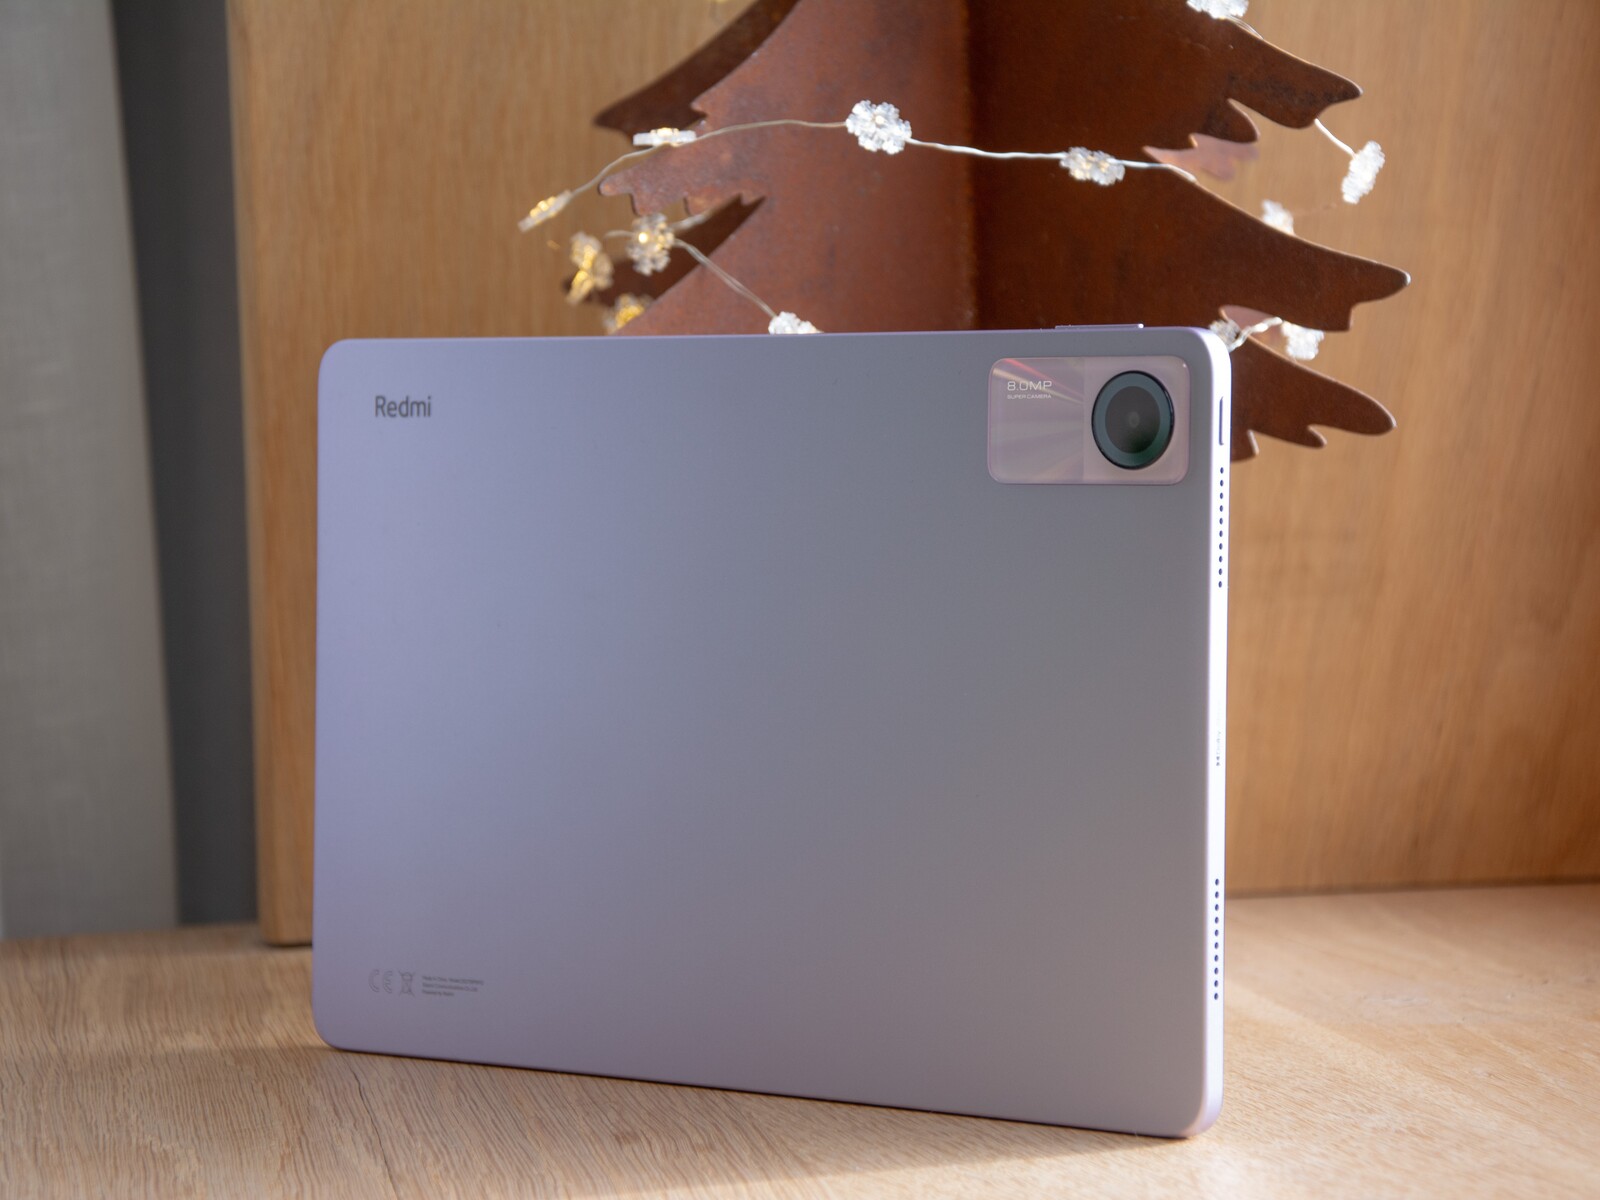 Xiaomi Mi Pad review: A plastic iPad Mini clone with oodles of Android  power (hands-on) - CNET